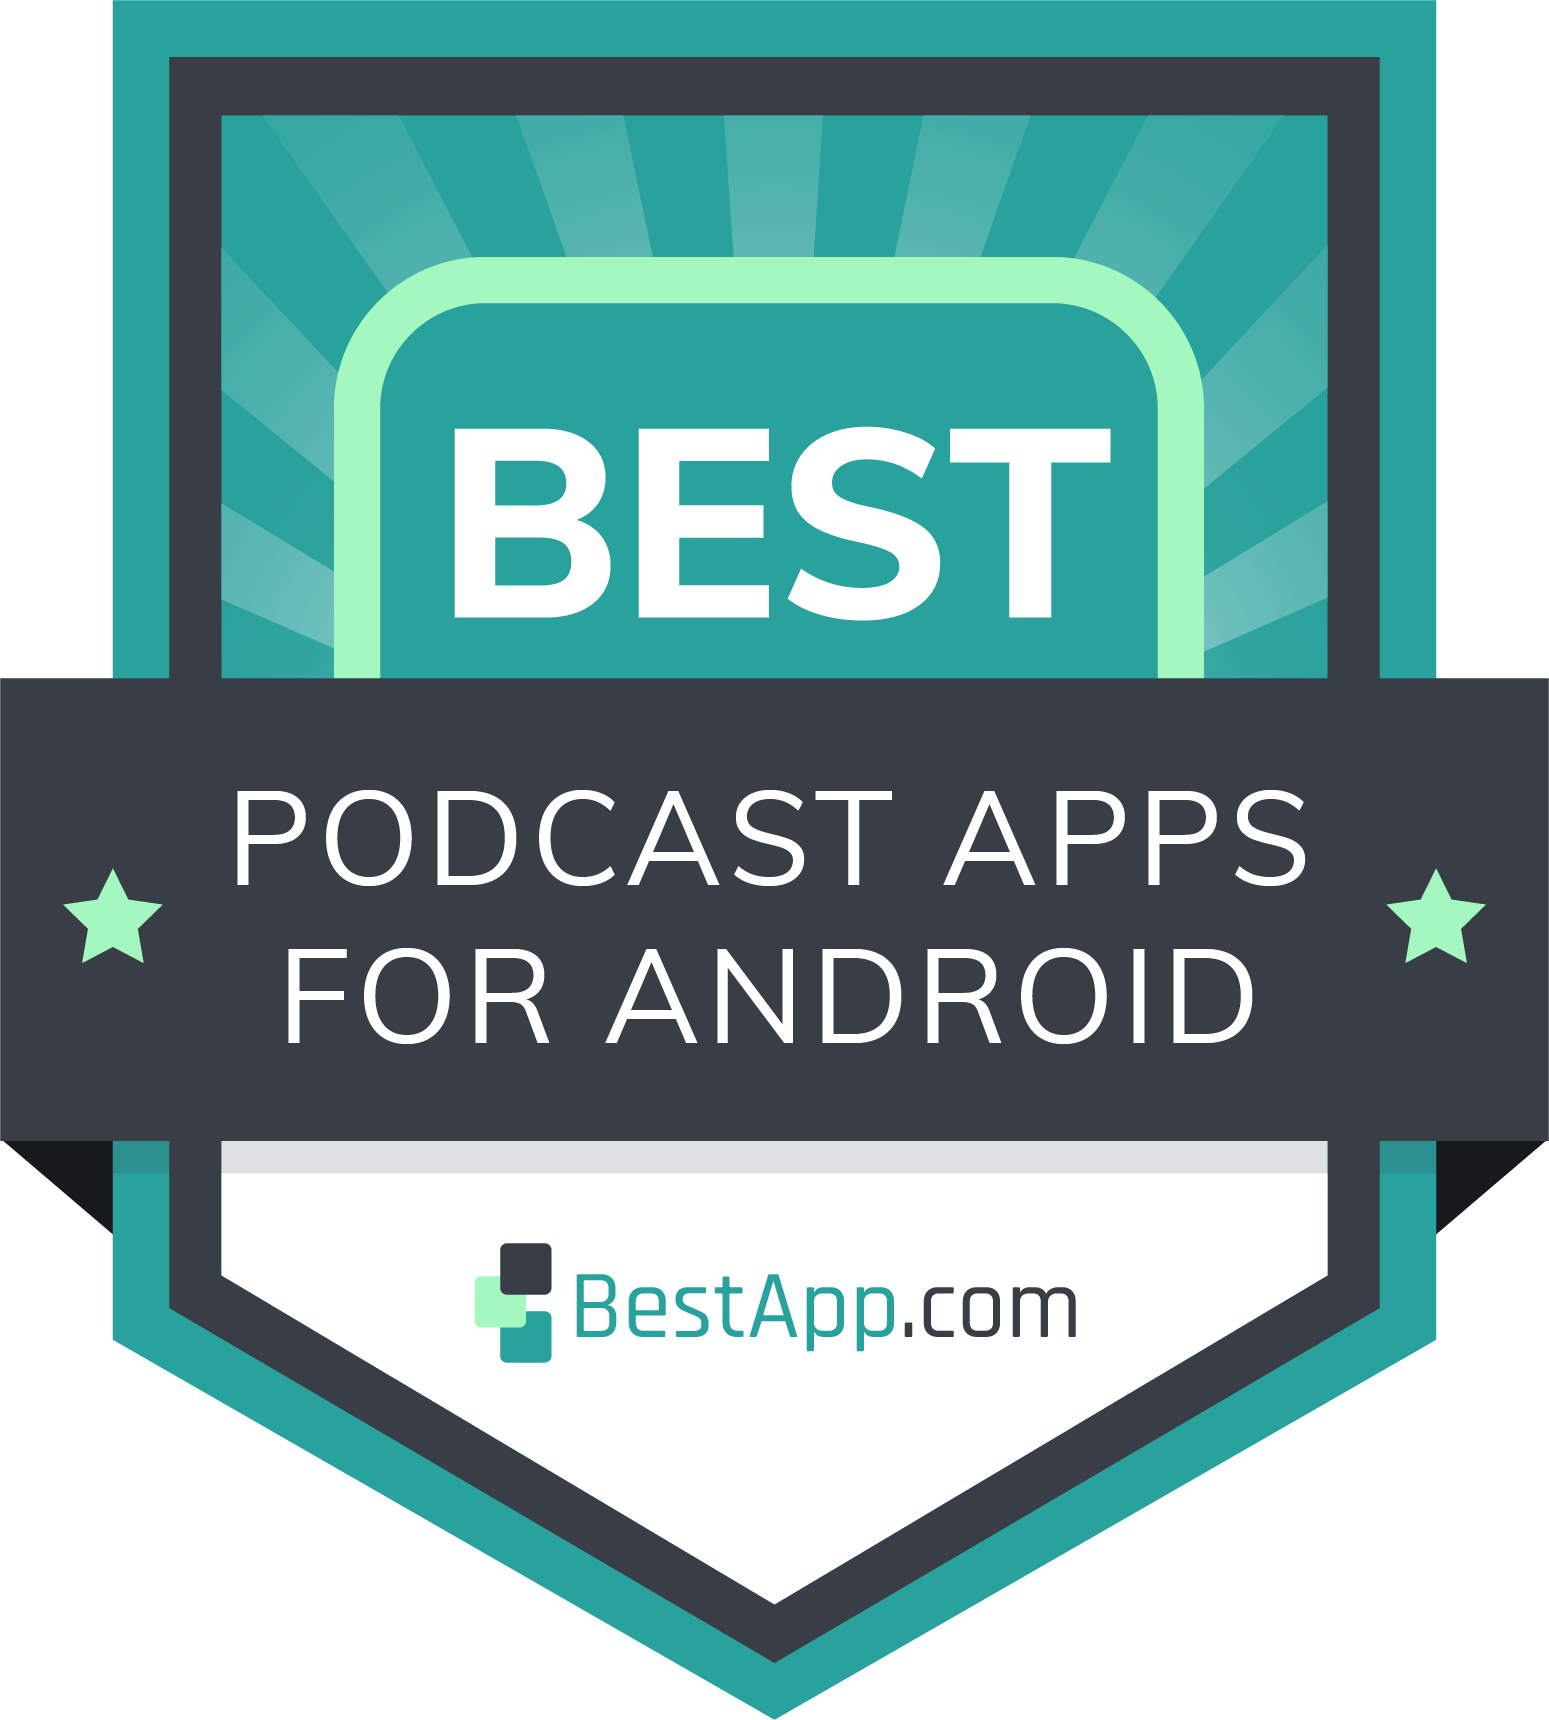 Best Podcast Apps for Android Badge